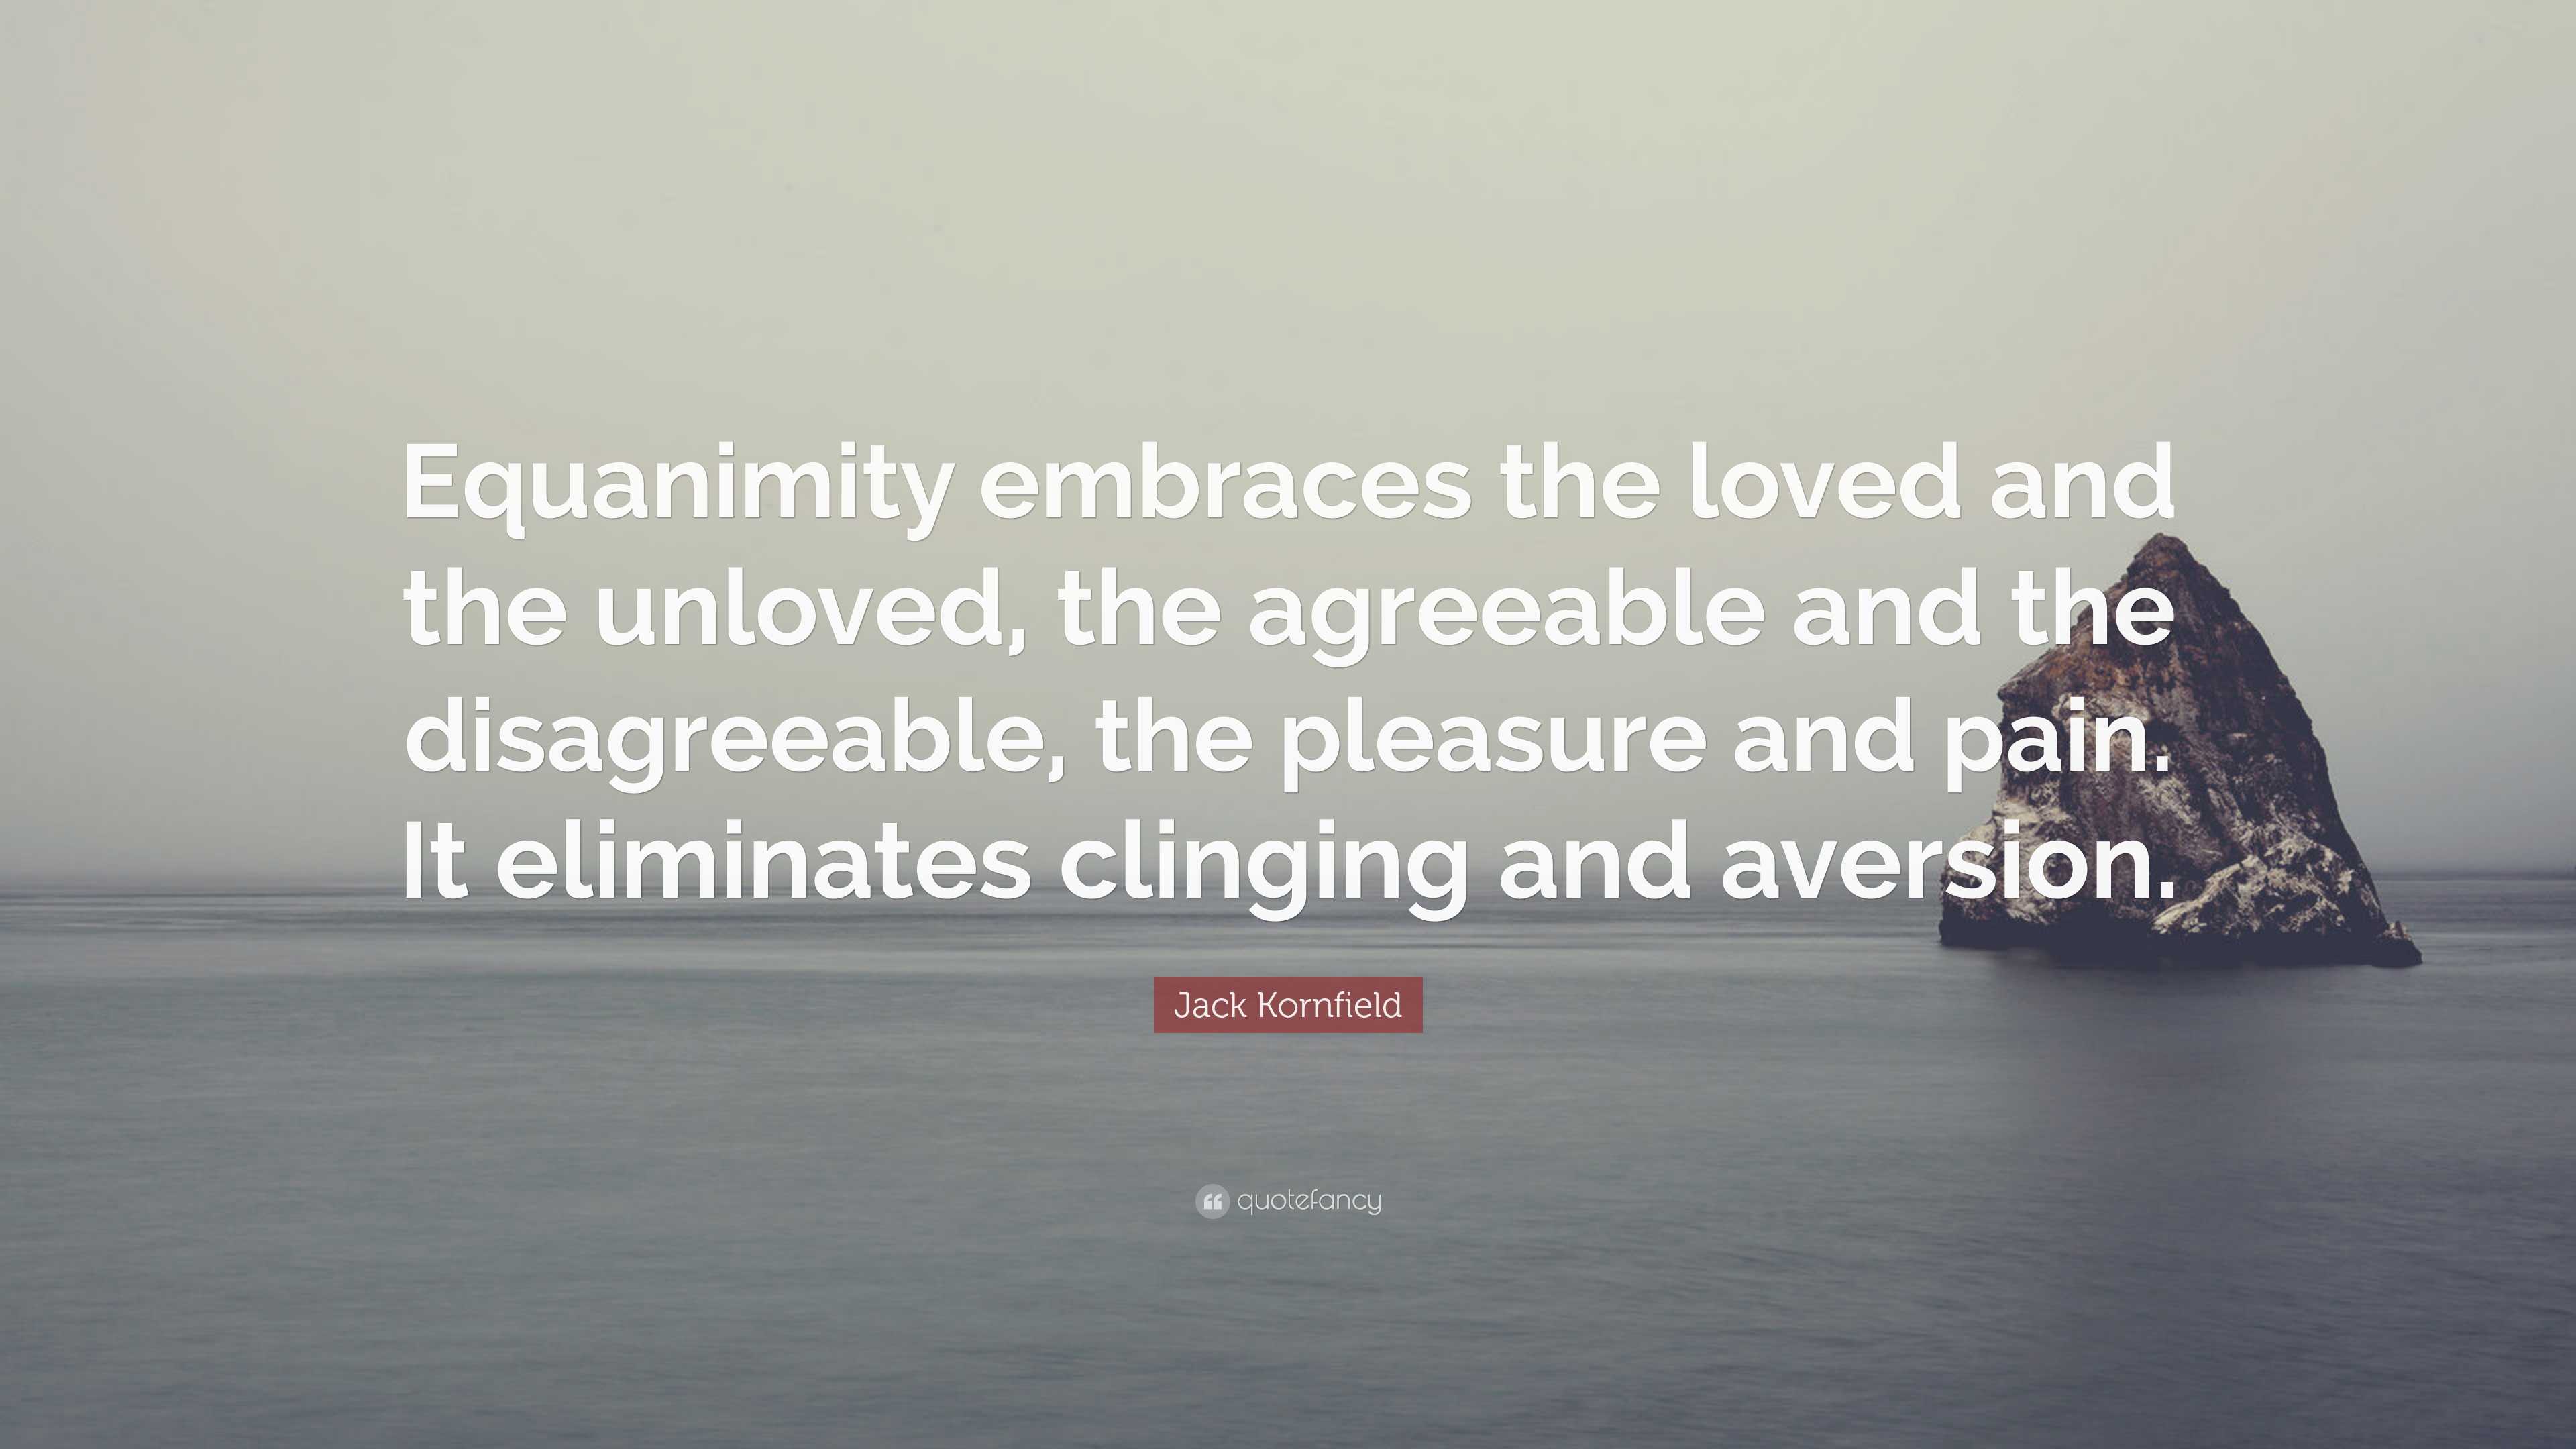 Jack Kornfield Quote: “Equanimity embraces the loved and the unloved ...